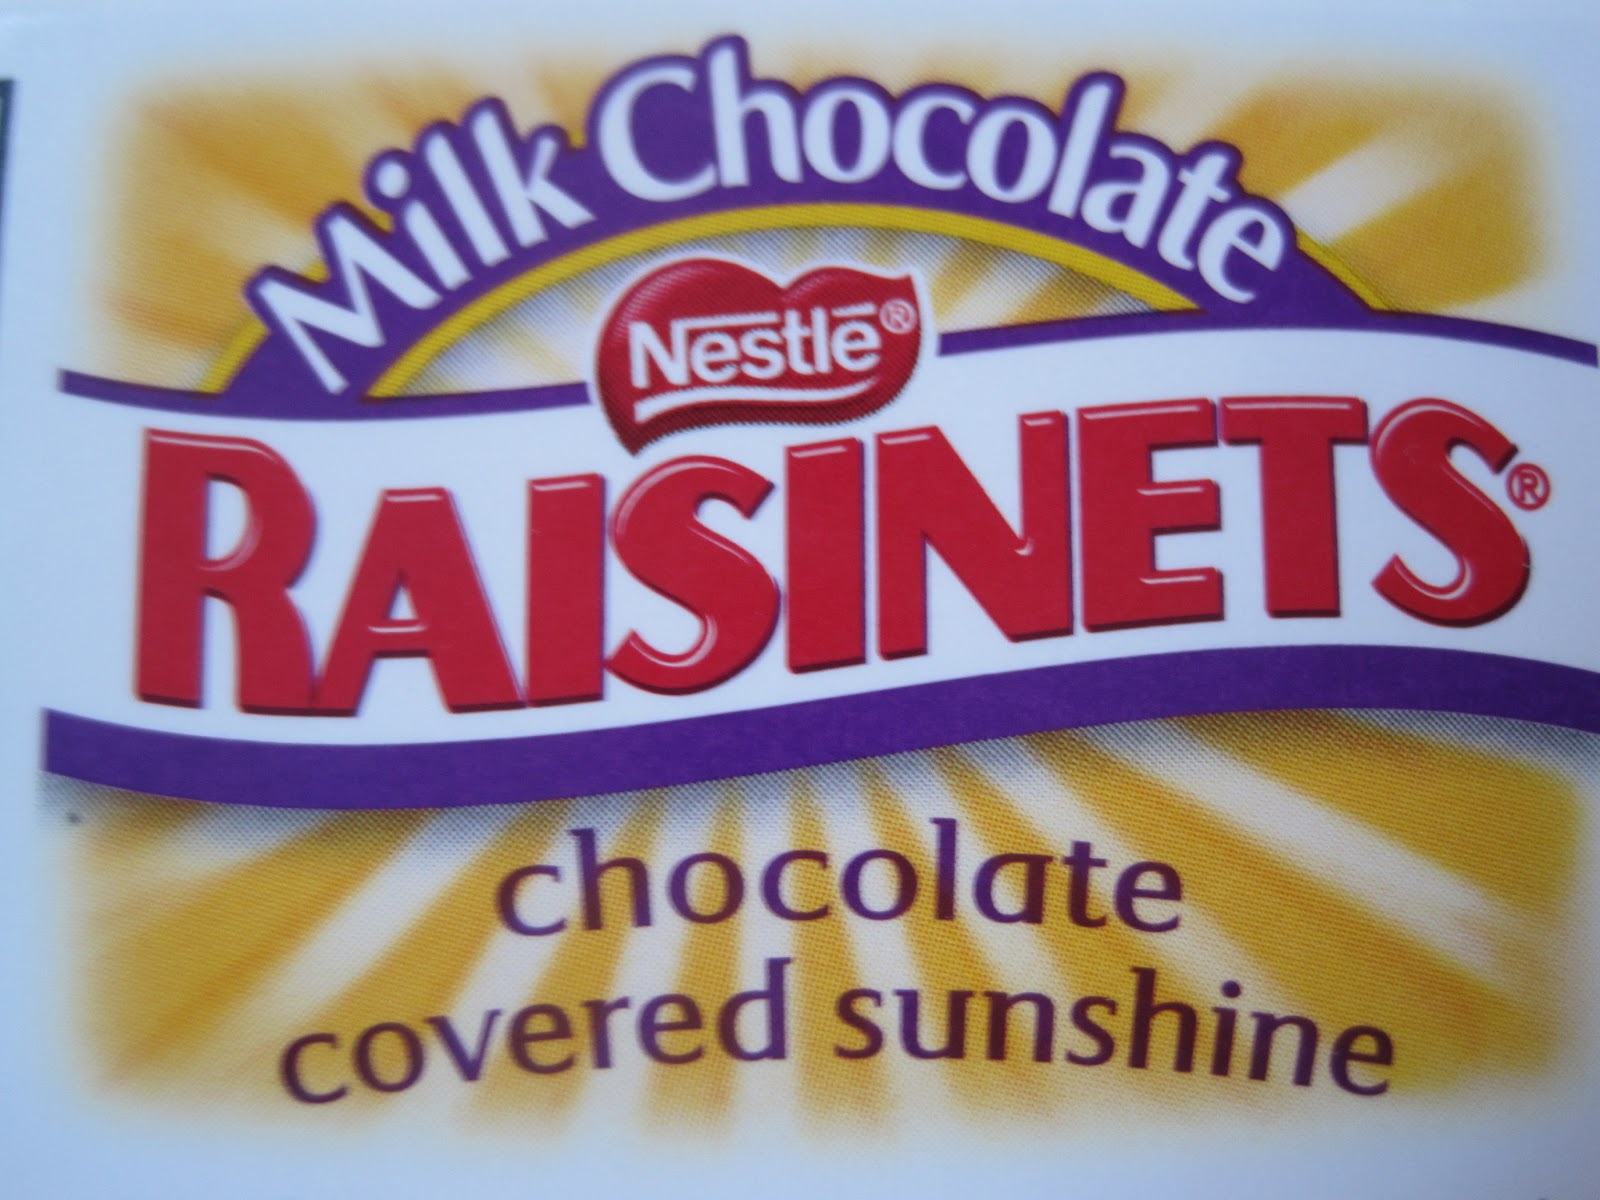 A Large Box Of Raisinets Has How Many Calories